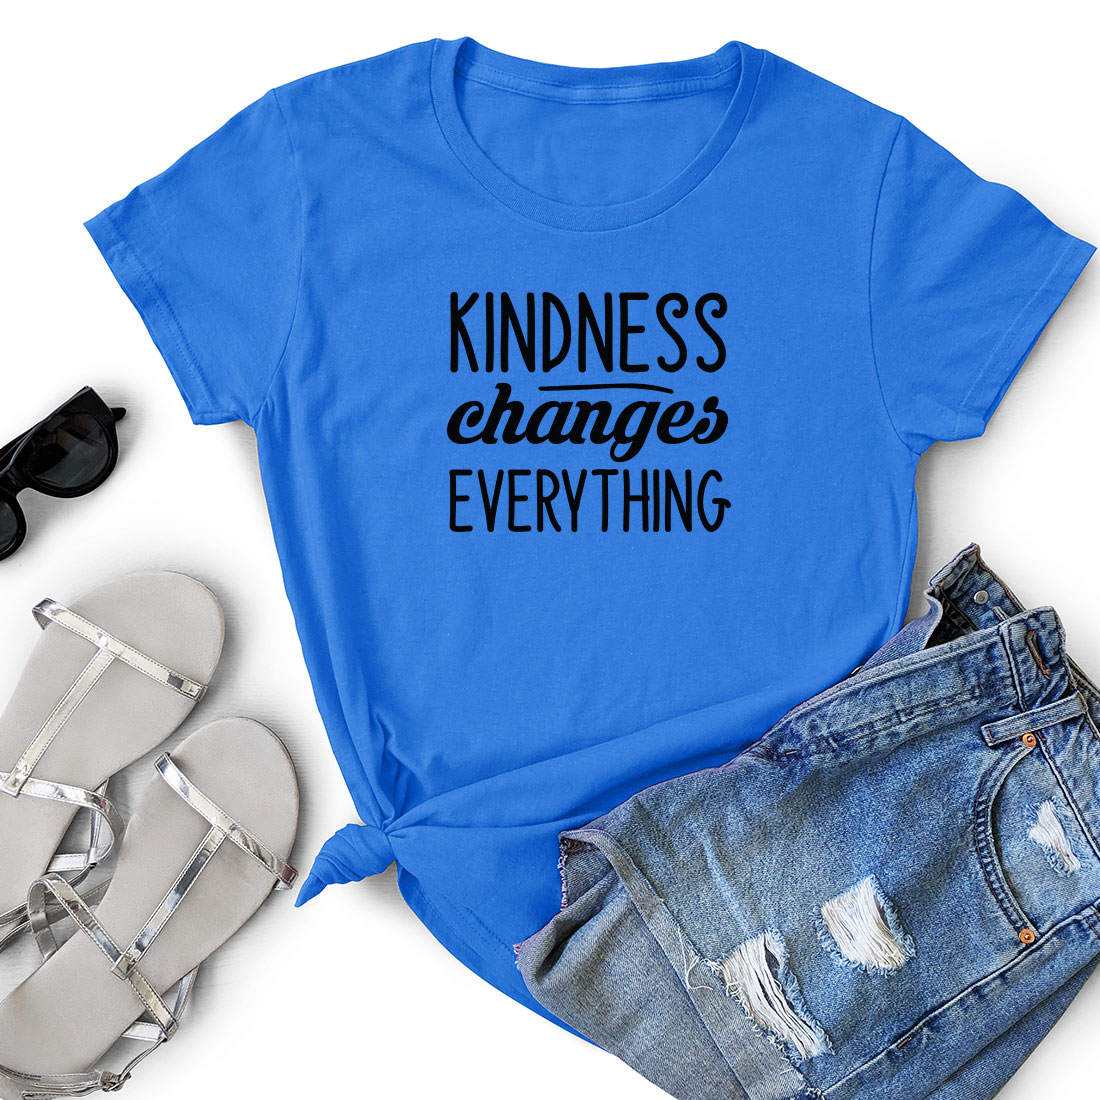 T - shirt that says kindness changes everything.